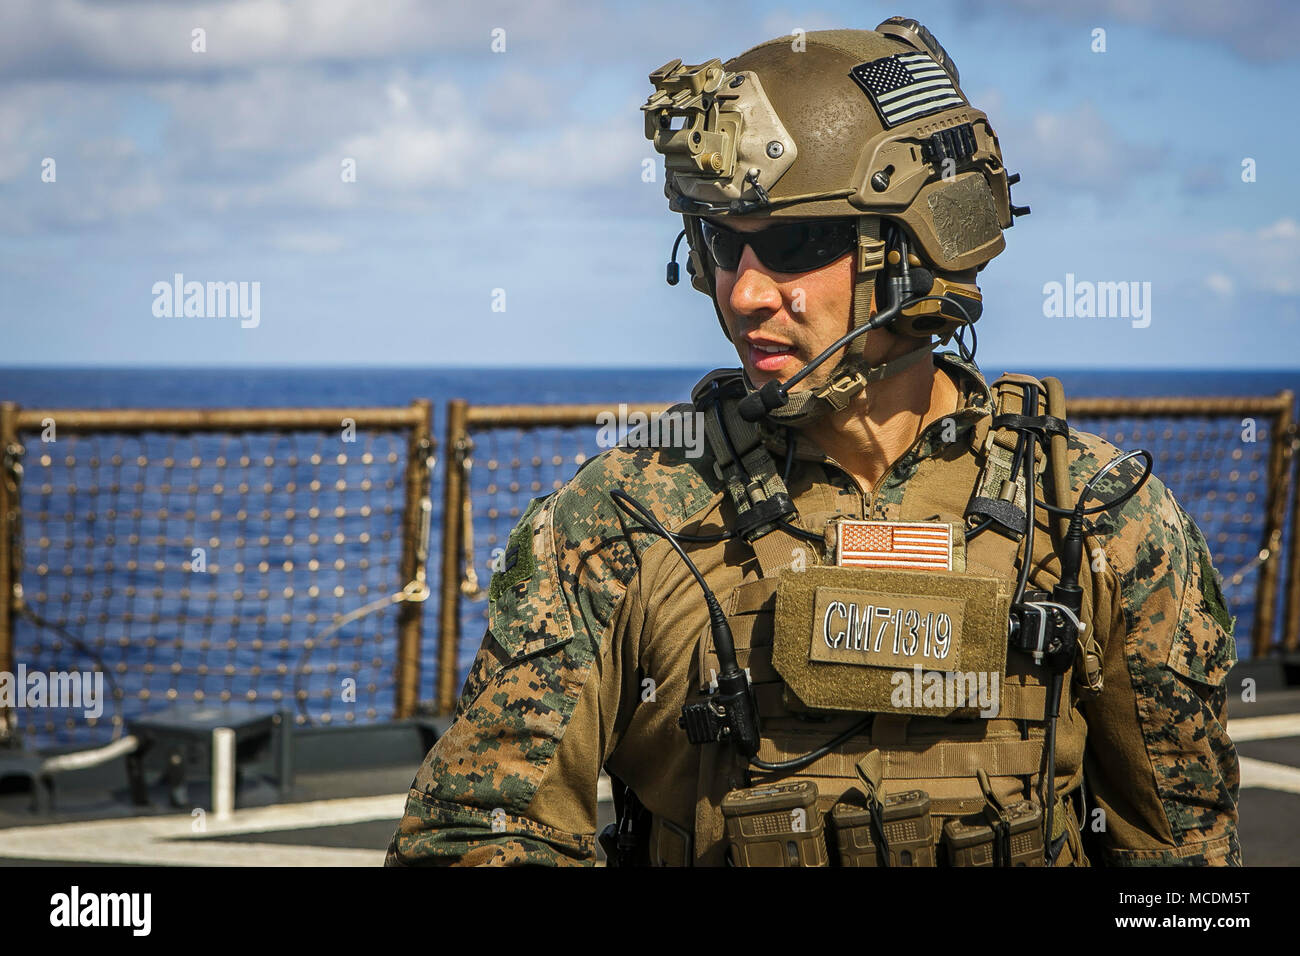 A U.S. Marine with Maritime Raid Force, 26th Marine Expeditionary Unit (MEU), walks to the firing line during a combat marksmanship training aboard the dock landing ship USS Oak Hill (LSD 51) while underway in the Atlantic Ocean, Feb. 19, 2018. The 26th MEU is participating in a deployment at sea to conduct maritime and peacekeeping operations, as well as maintaining relationships with foreign militaries through joint exercises. (U.S. Marine Corps photo by Staff Sgt. Dengrier M. Baez) Stock Photo